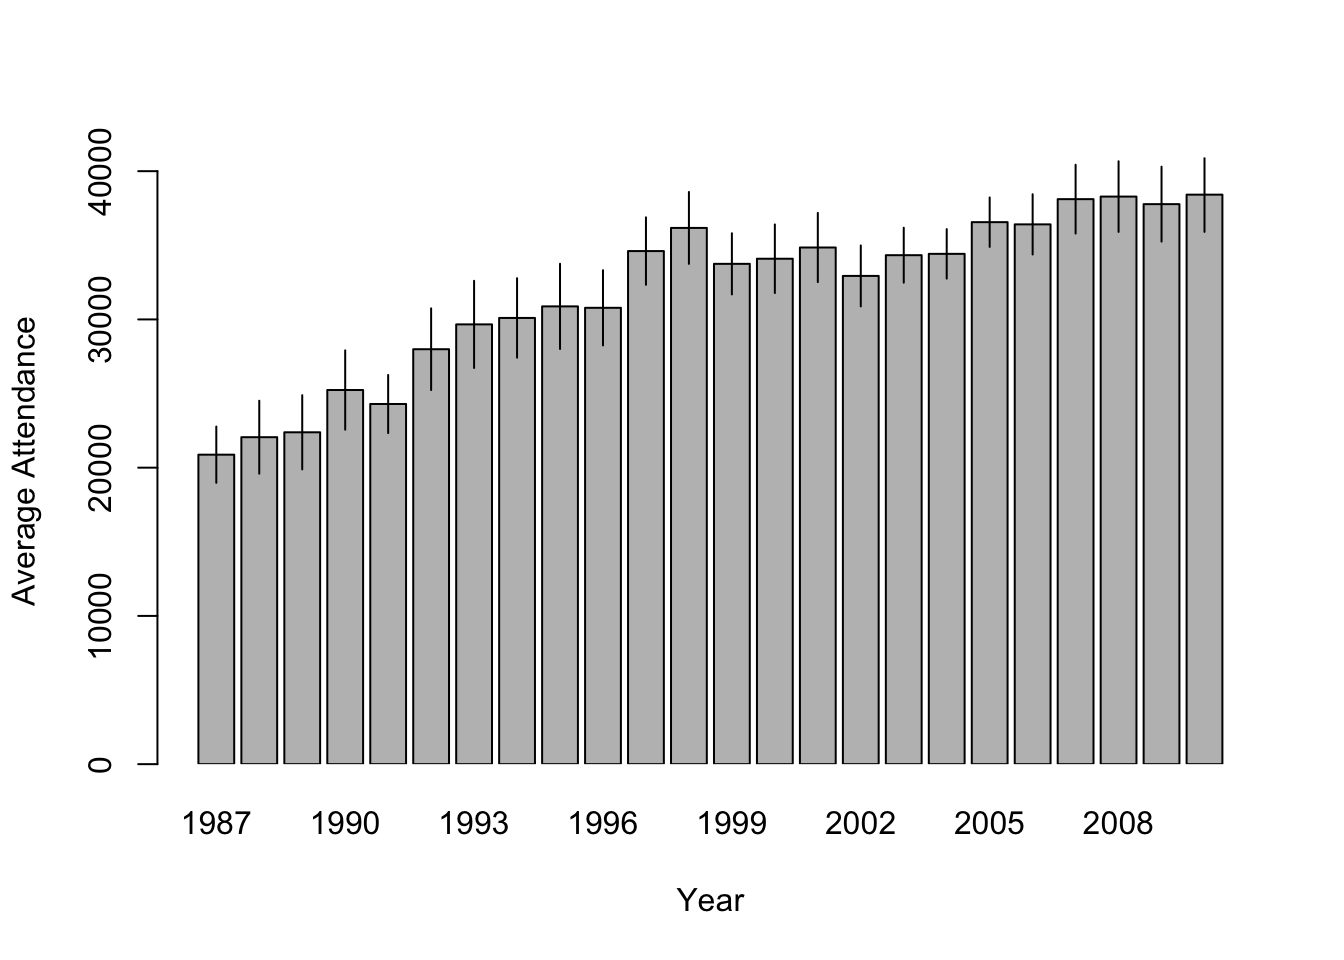 Means and 95% confidence intervals for AFL `attendance`, plotted separately for each `year` from 1987 to 2010. This graph was drawn using the `bargraph.CI()` function.